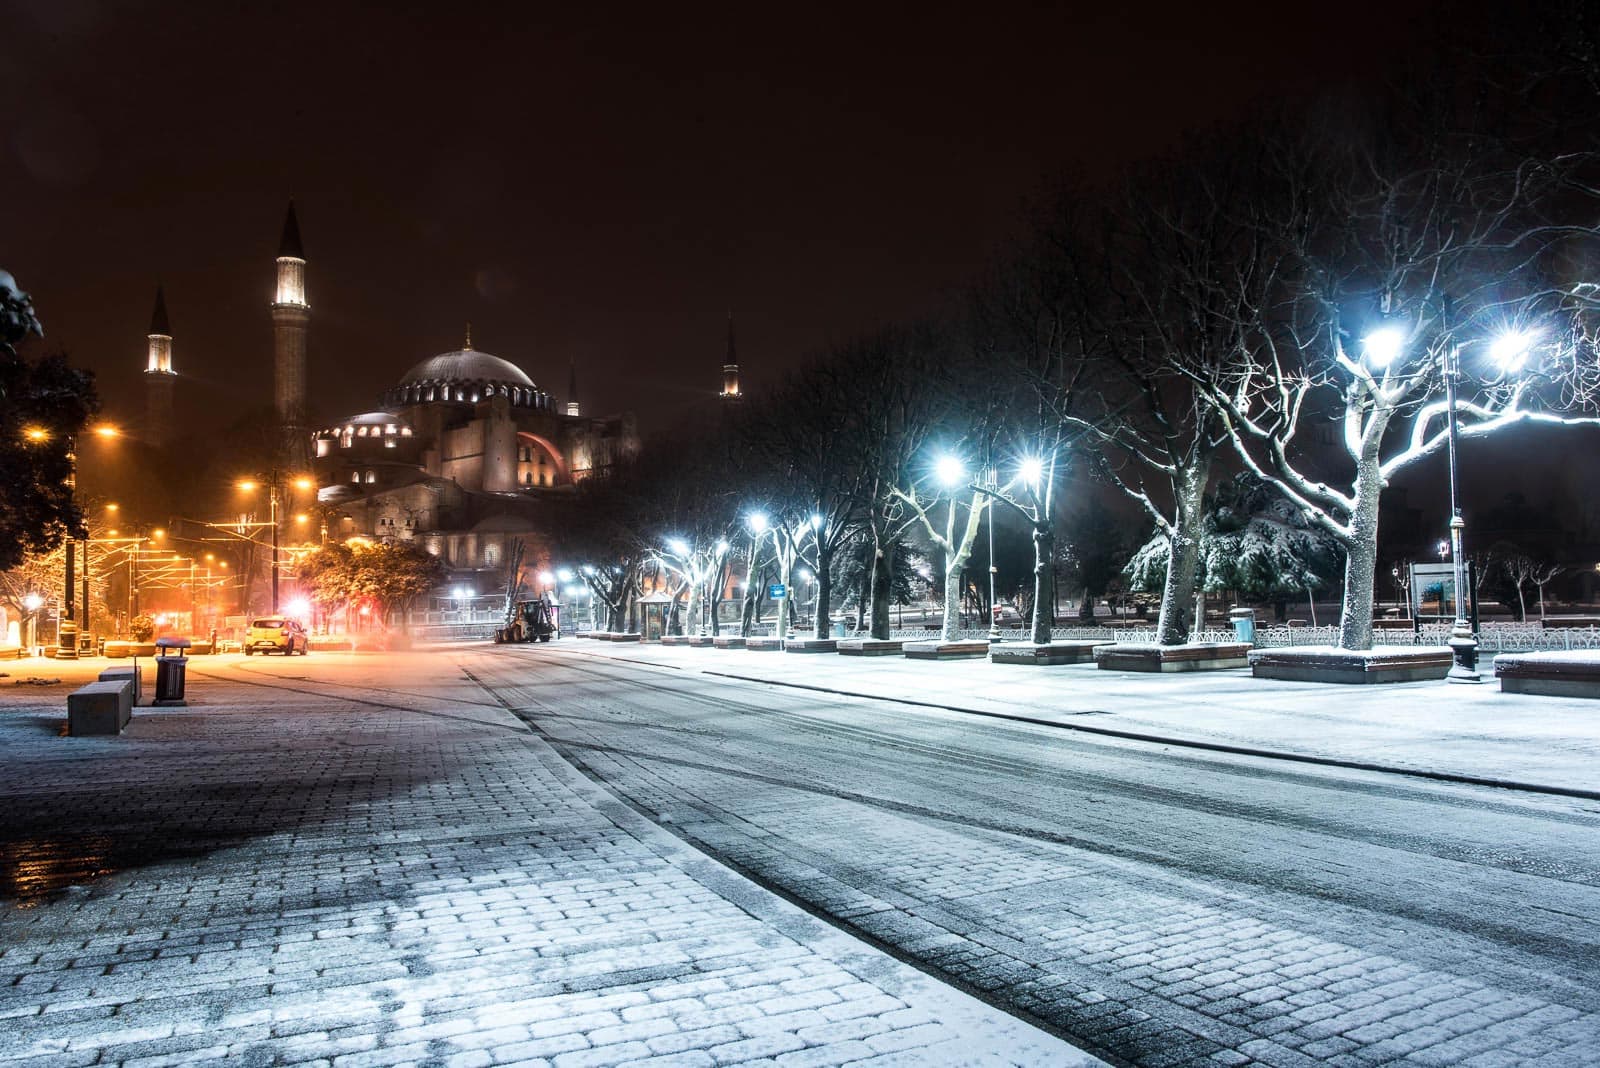 A snowy street with lights and a mosque in the background.